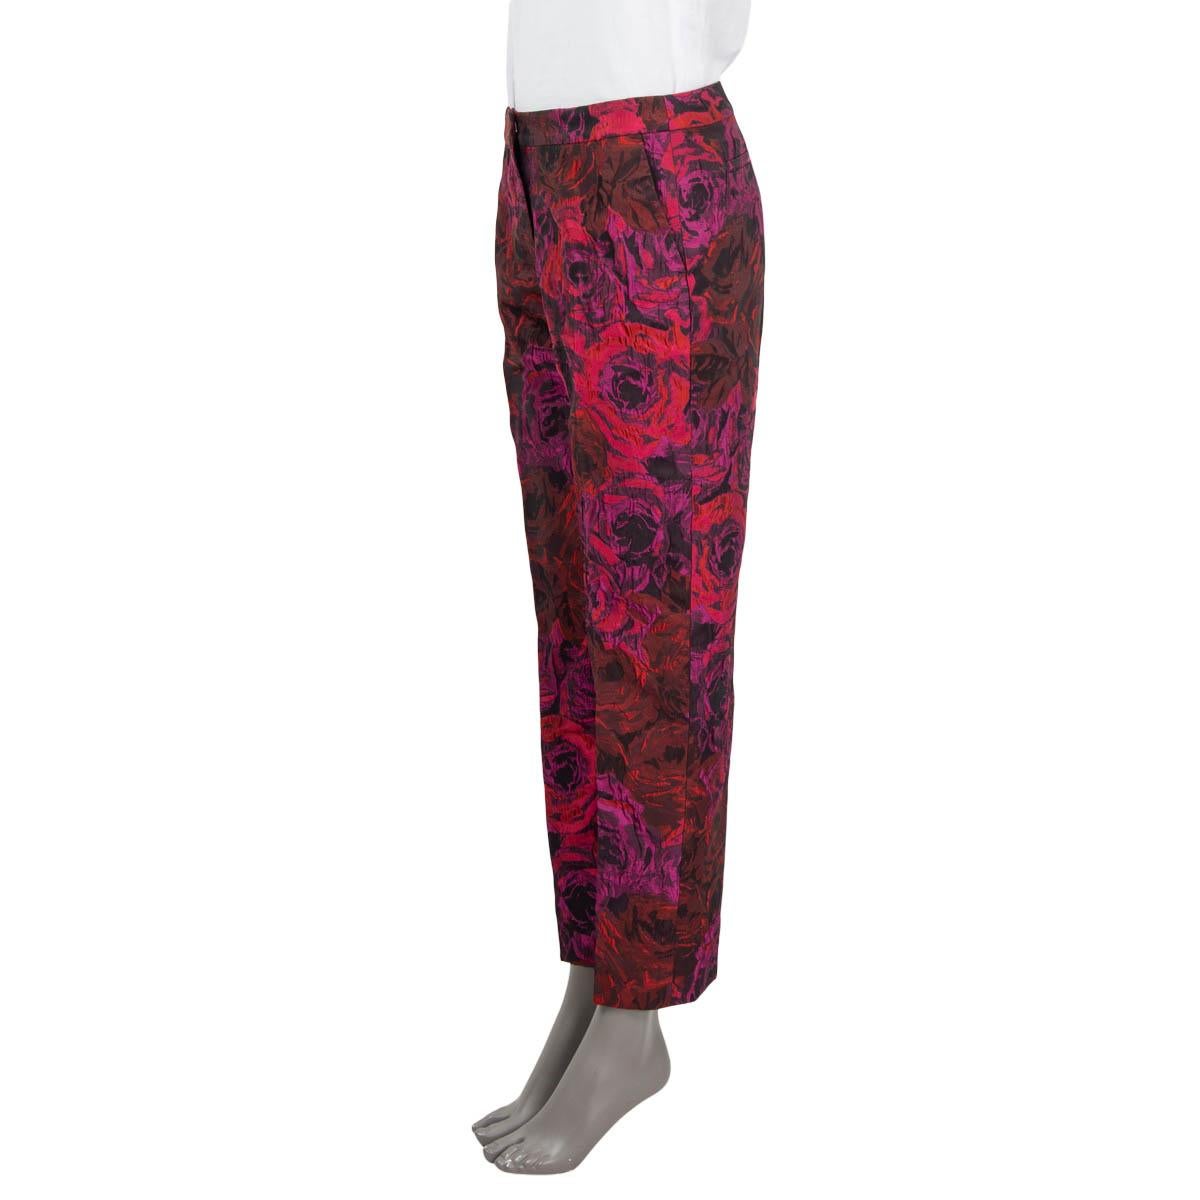 100% authentic Dries Van Noten jacquard pleated pants in burgundy, red, purple and black acetate (55%), polyester (41%) and nylon (4%). Feature two side slit pockets and two sewn shut slit pockets on the back. Open with a concealed button, zipper